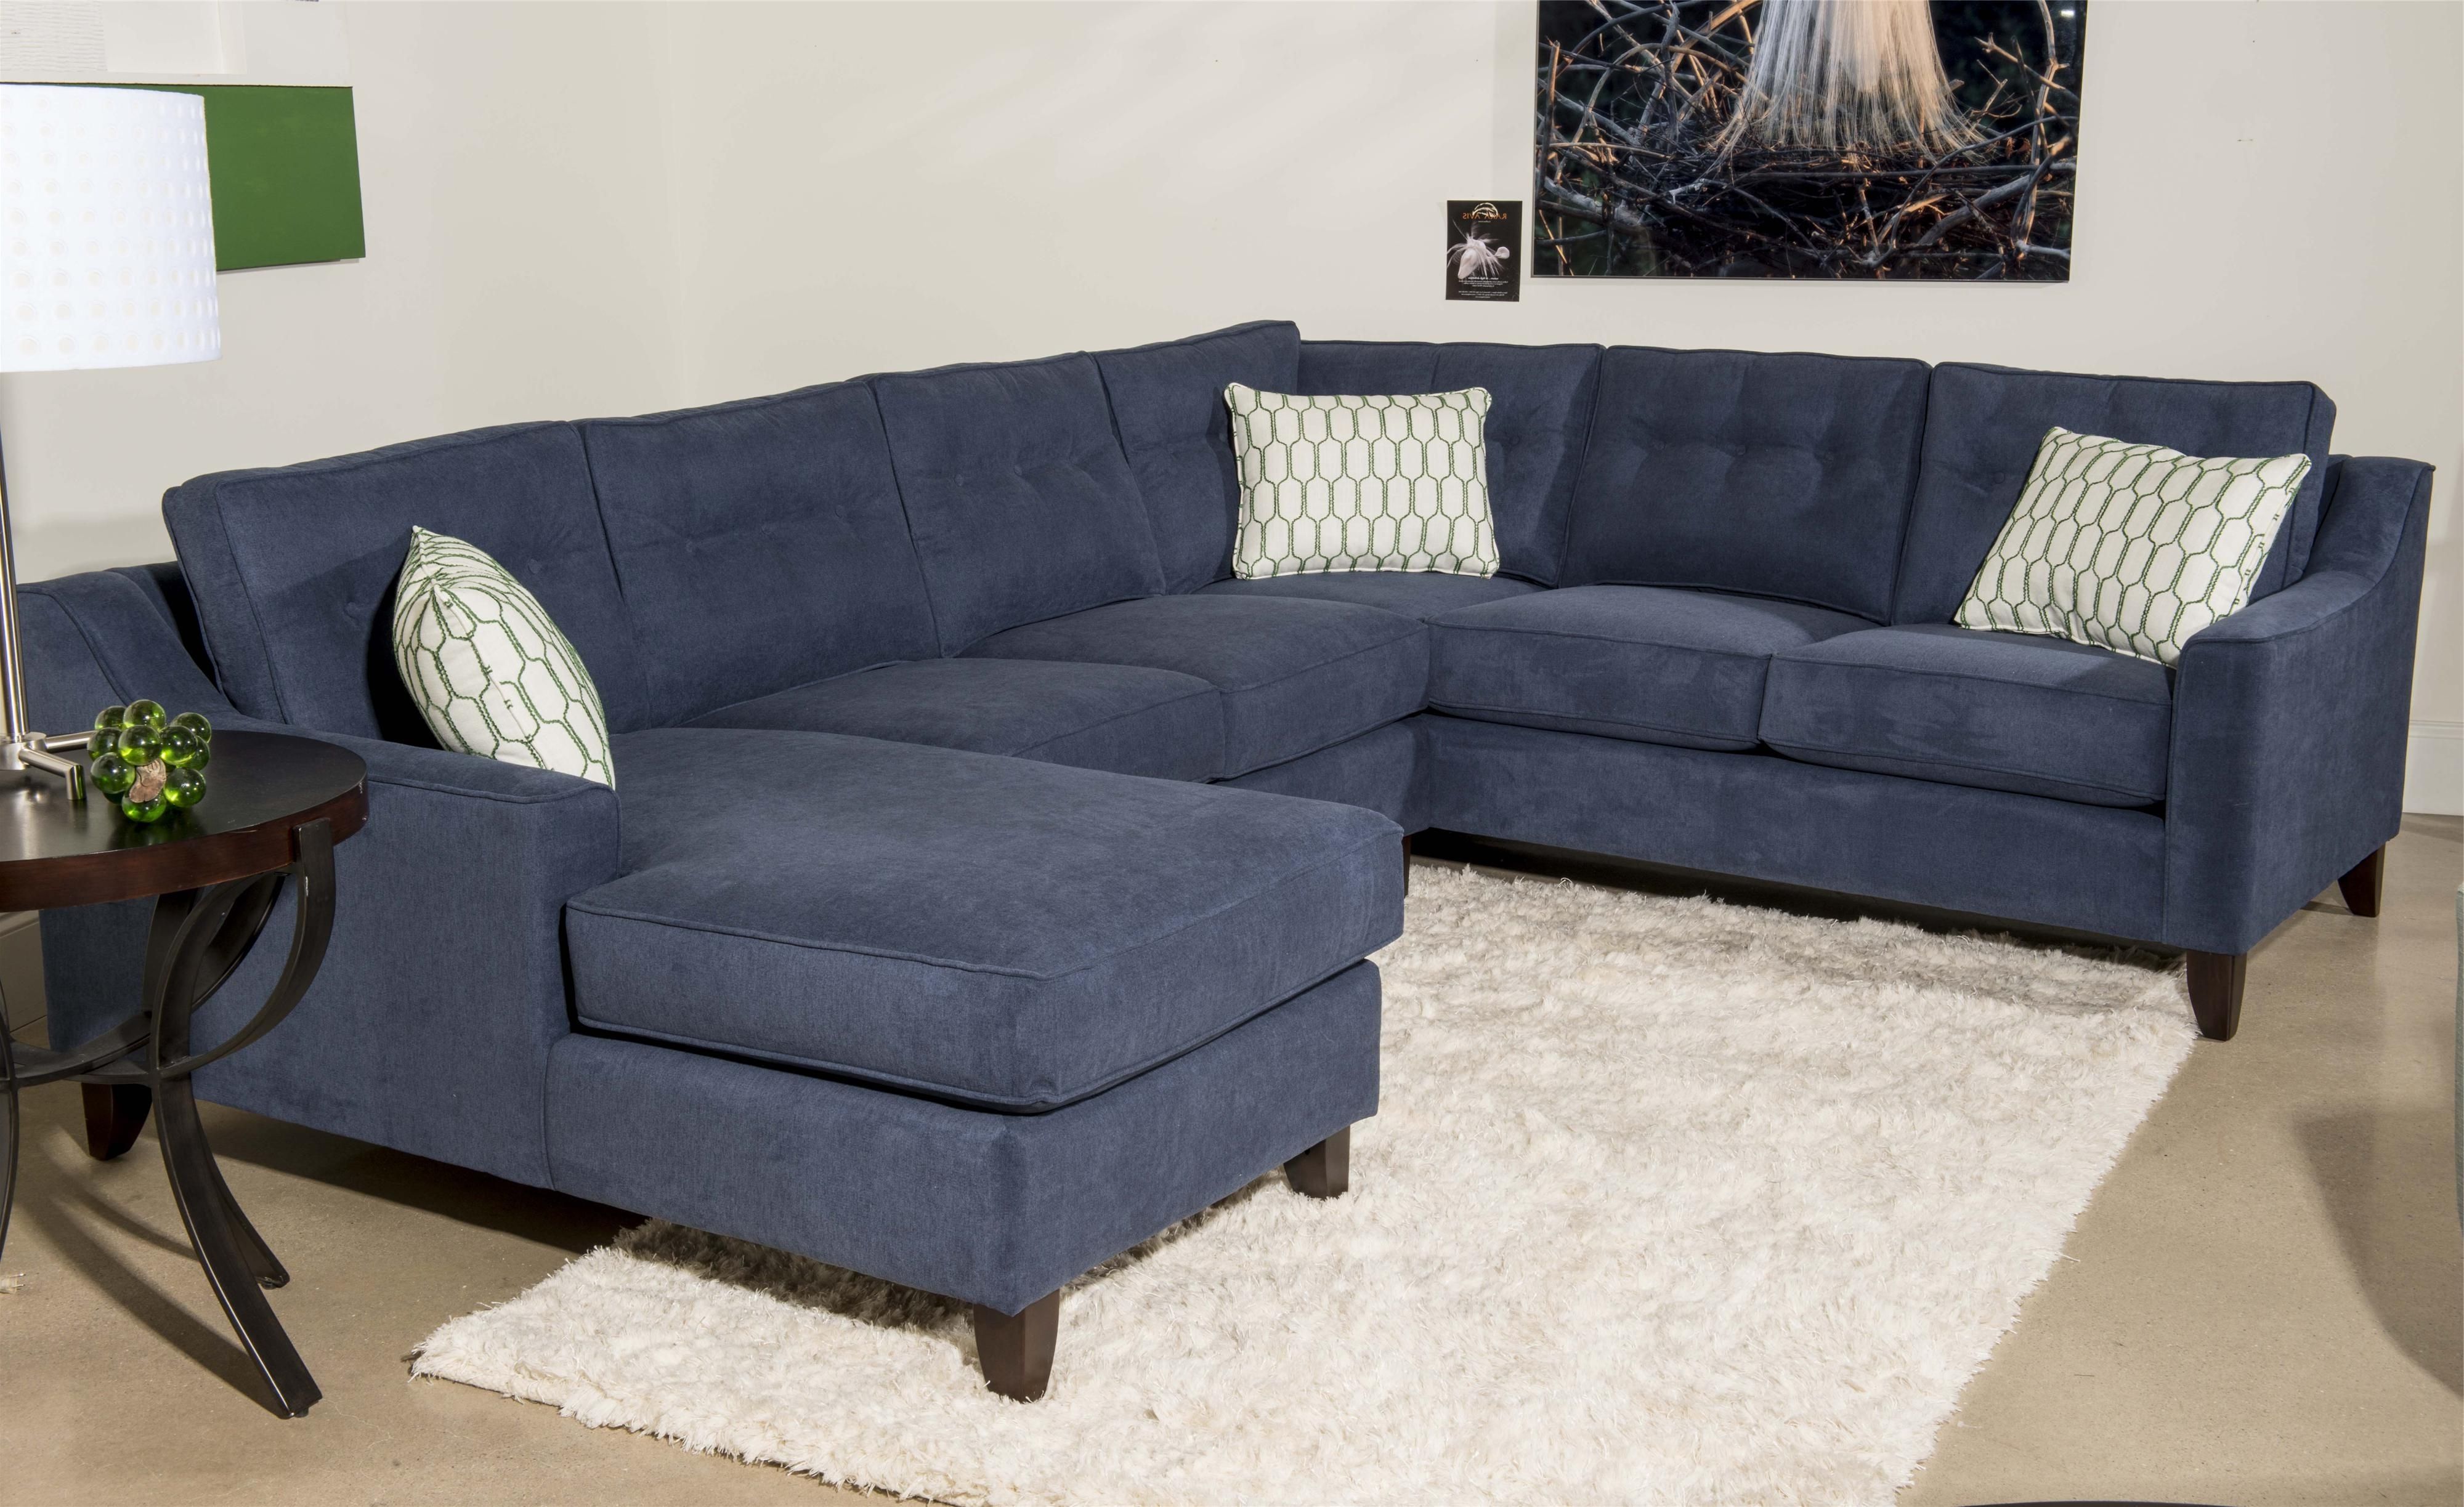 Most Popular Contemporary 3 Piece Sectional Sofa With Chaiseklaussner For Gardiners Sectional Sofas (View 7 of 15)